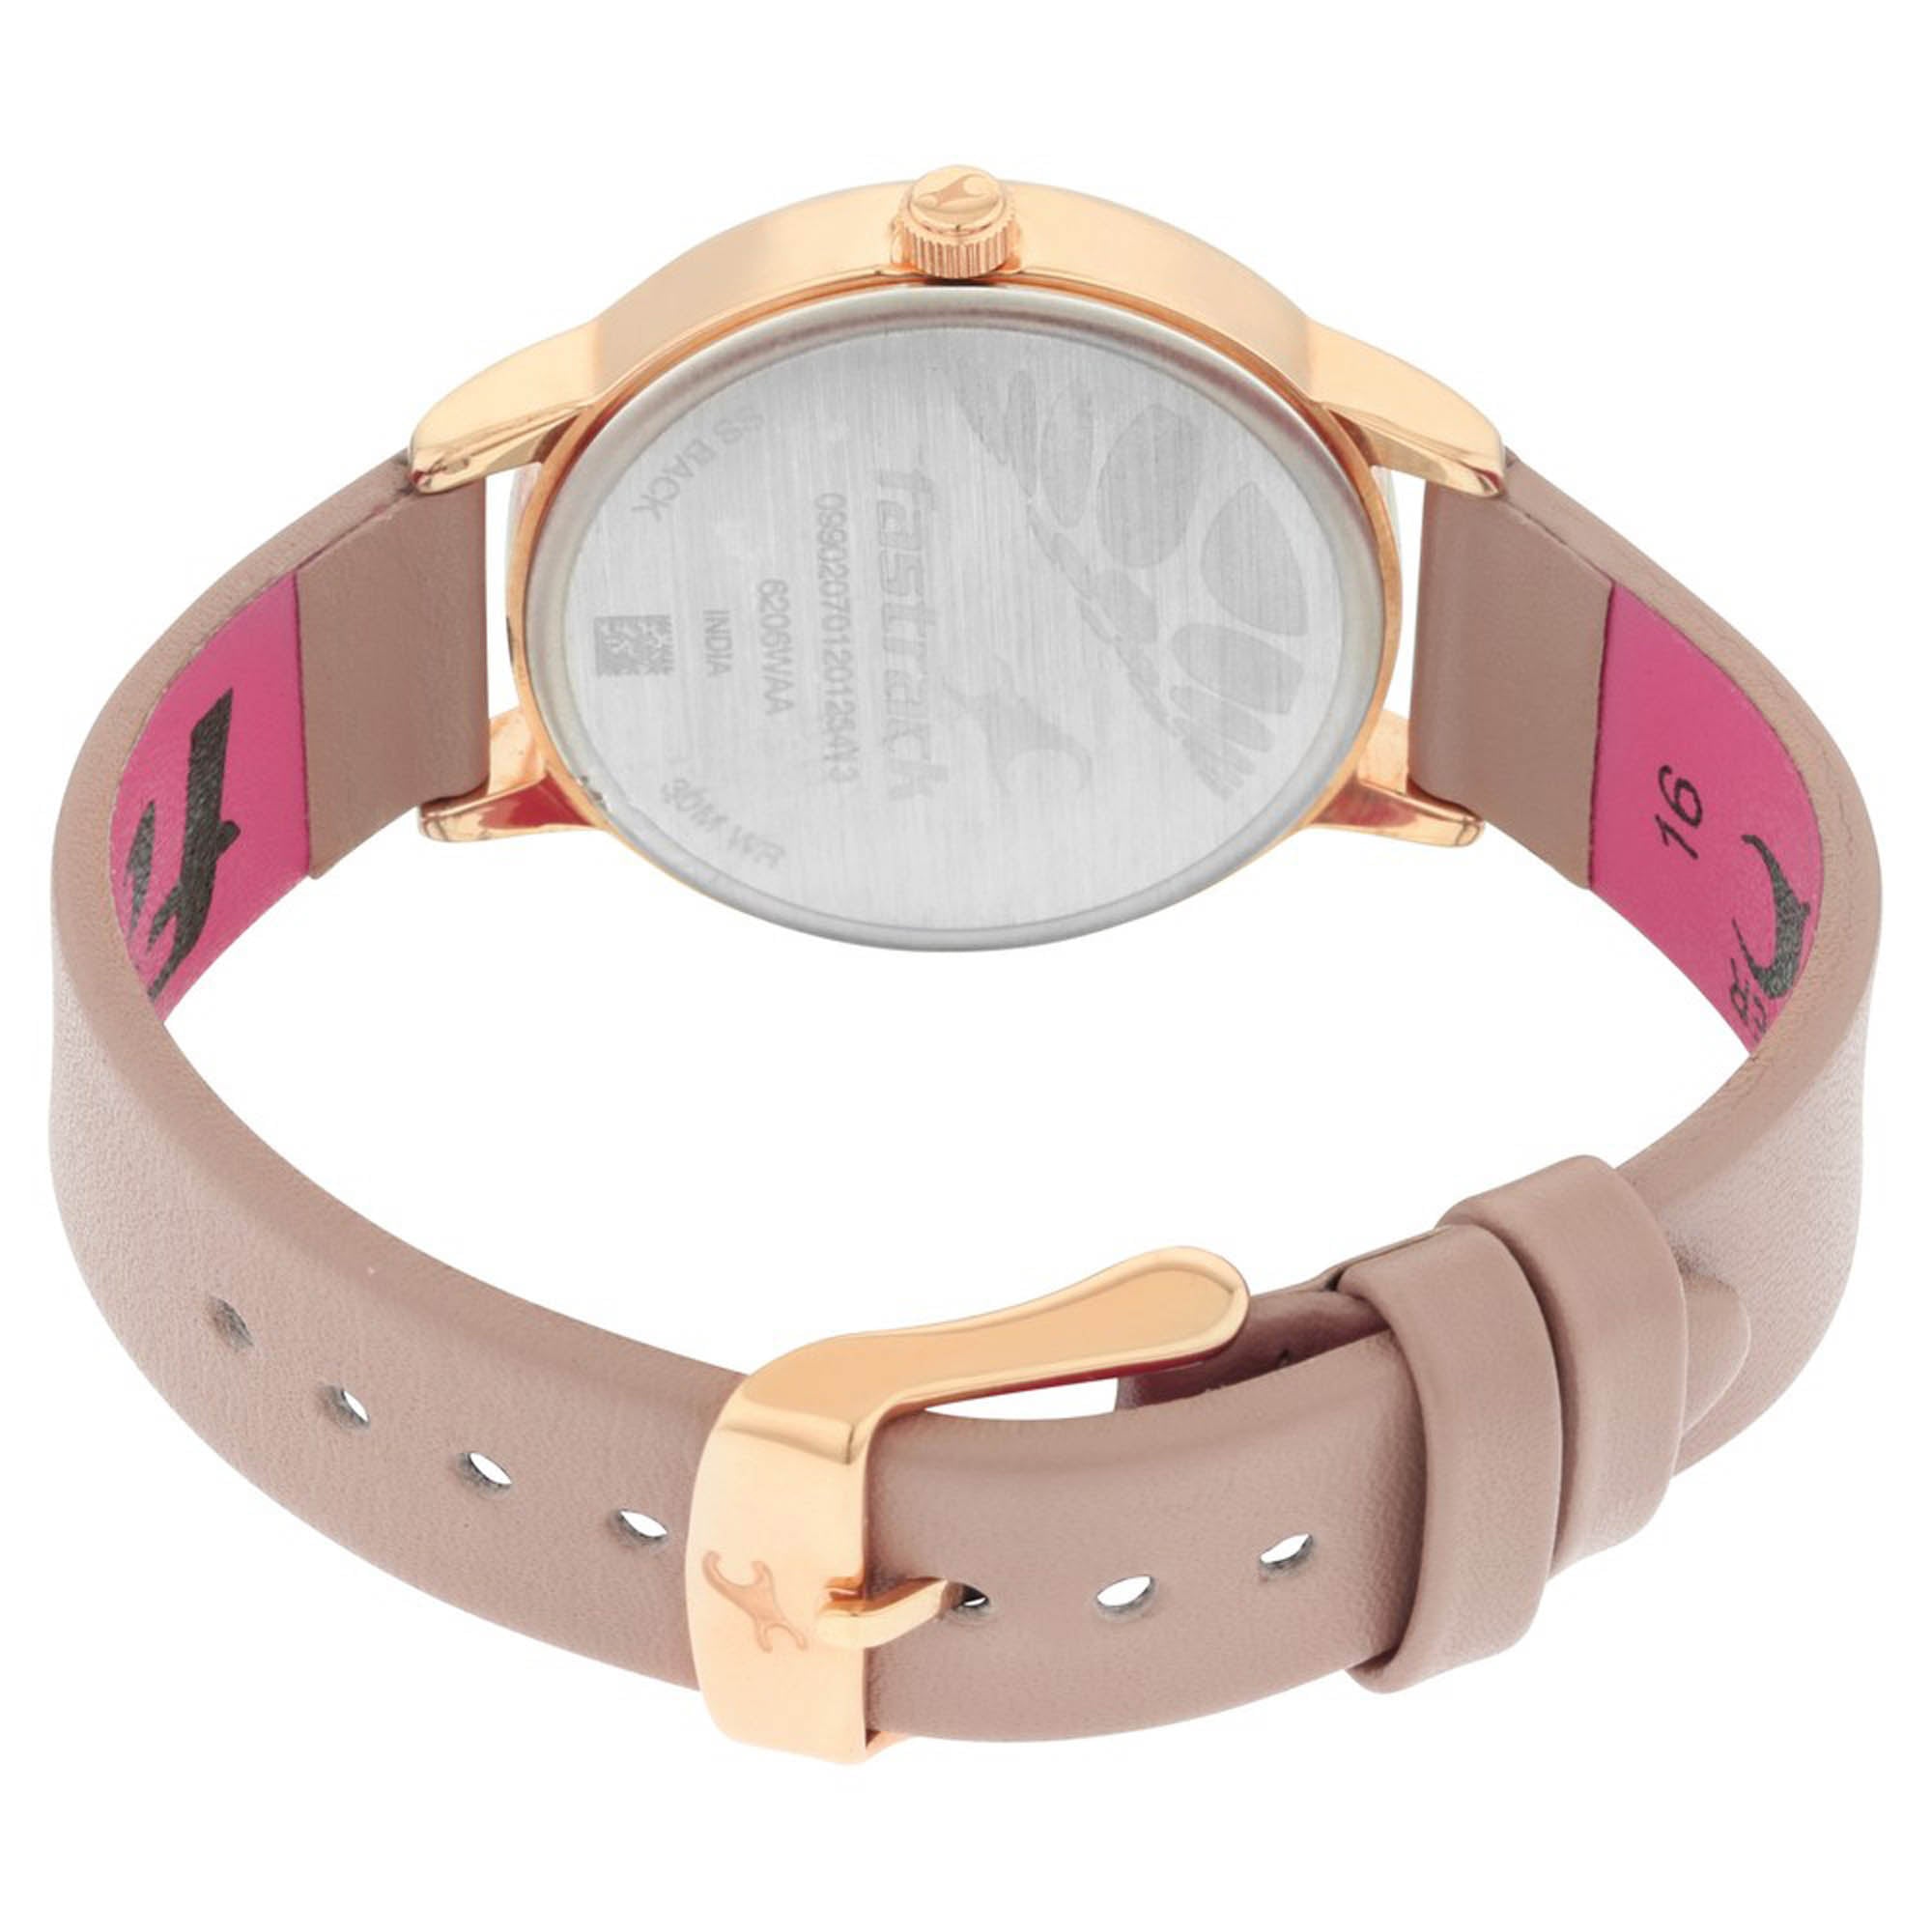 Fastrack Fastrack Ruffles Quartz Analog with Date Pink Dial Leather Strap Watch for Girls